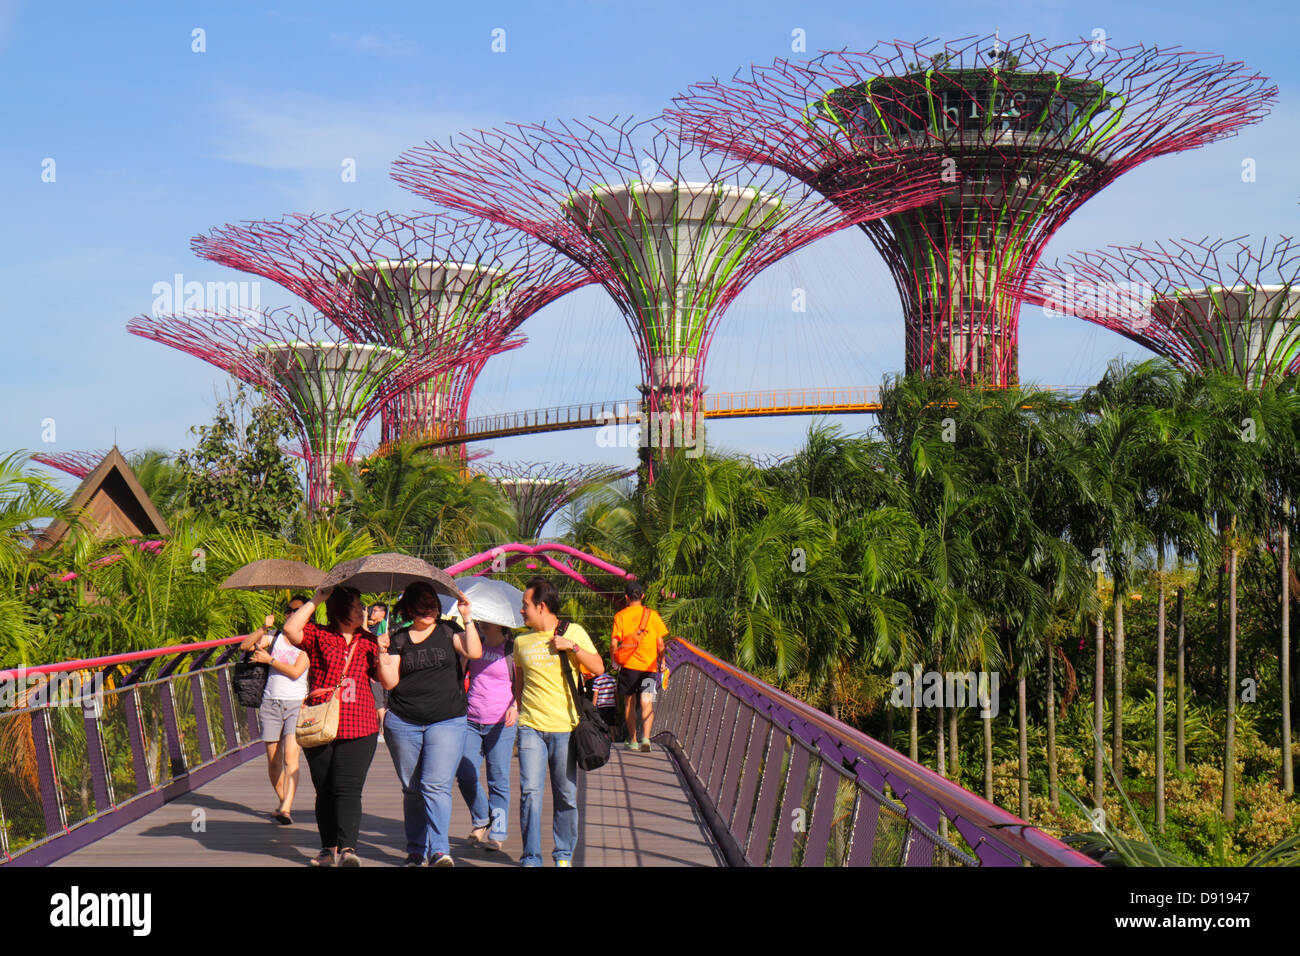 Singapore Gardens by the Bay,park,Supertrees,elevated walkway,umbrellas,using,sun shade,Sing130202173 Stock Photo